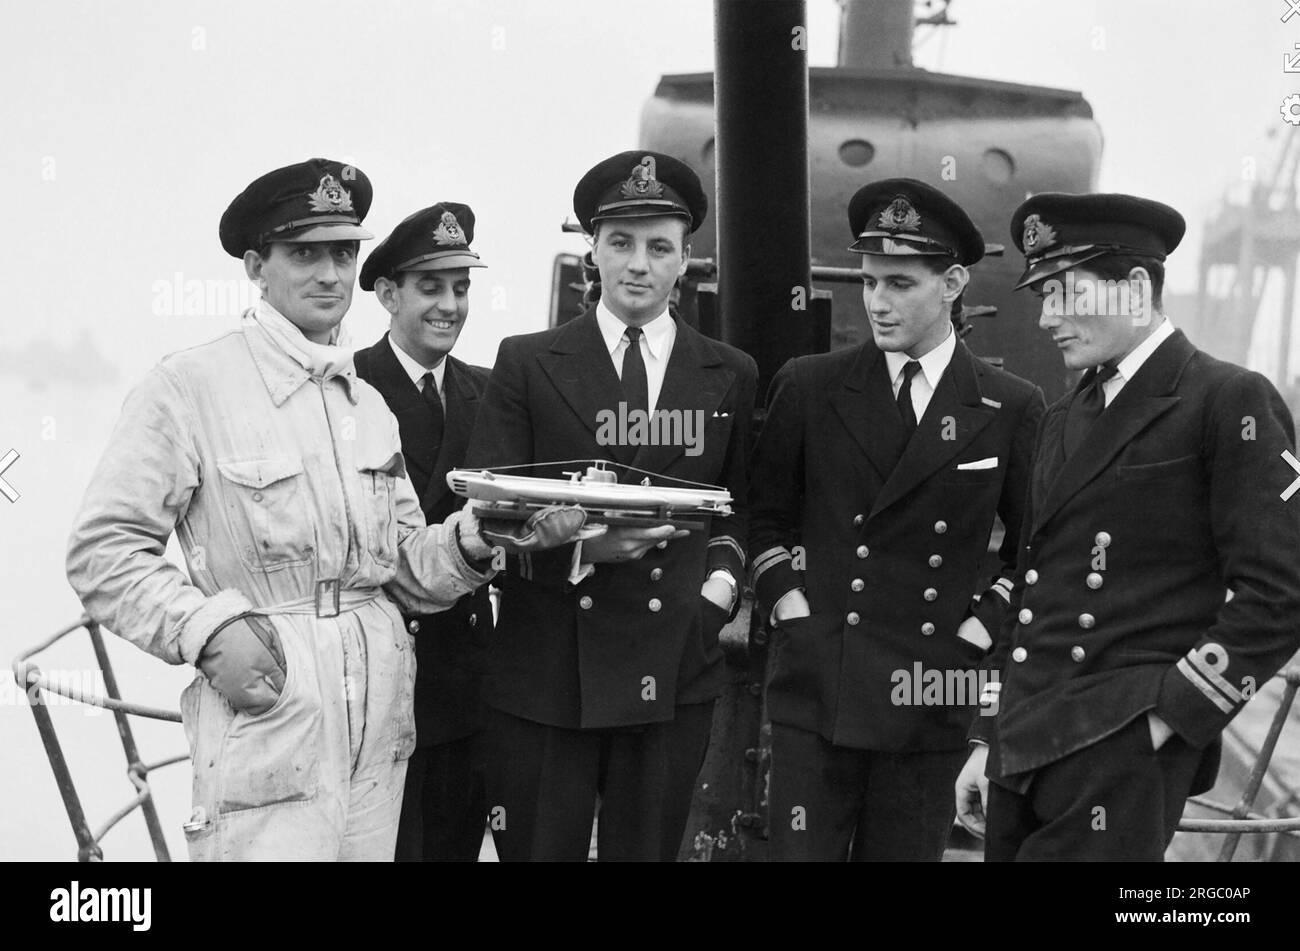 OPERATION N MINCEMEAT 1943 The officers of HMS Seraph the submarine which carried Martin's body to Spain photographed in December 1943 with commanding officer Lieutenant N Jewell MBE second from right. They are admiring the model of their  submarine made by  Warrant Engineer M Stevenson DSC at left Stock Photo